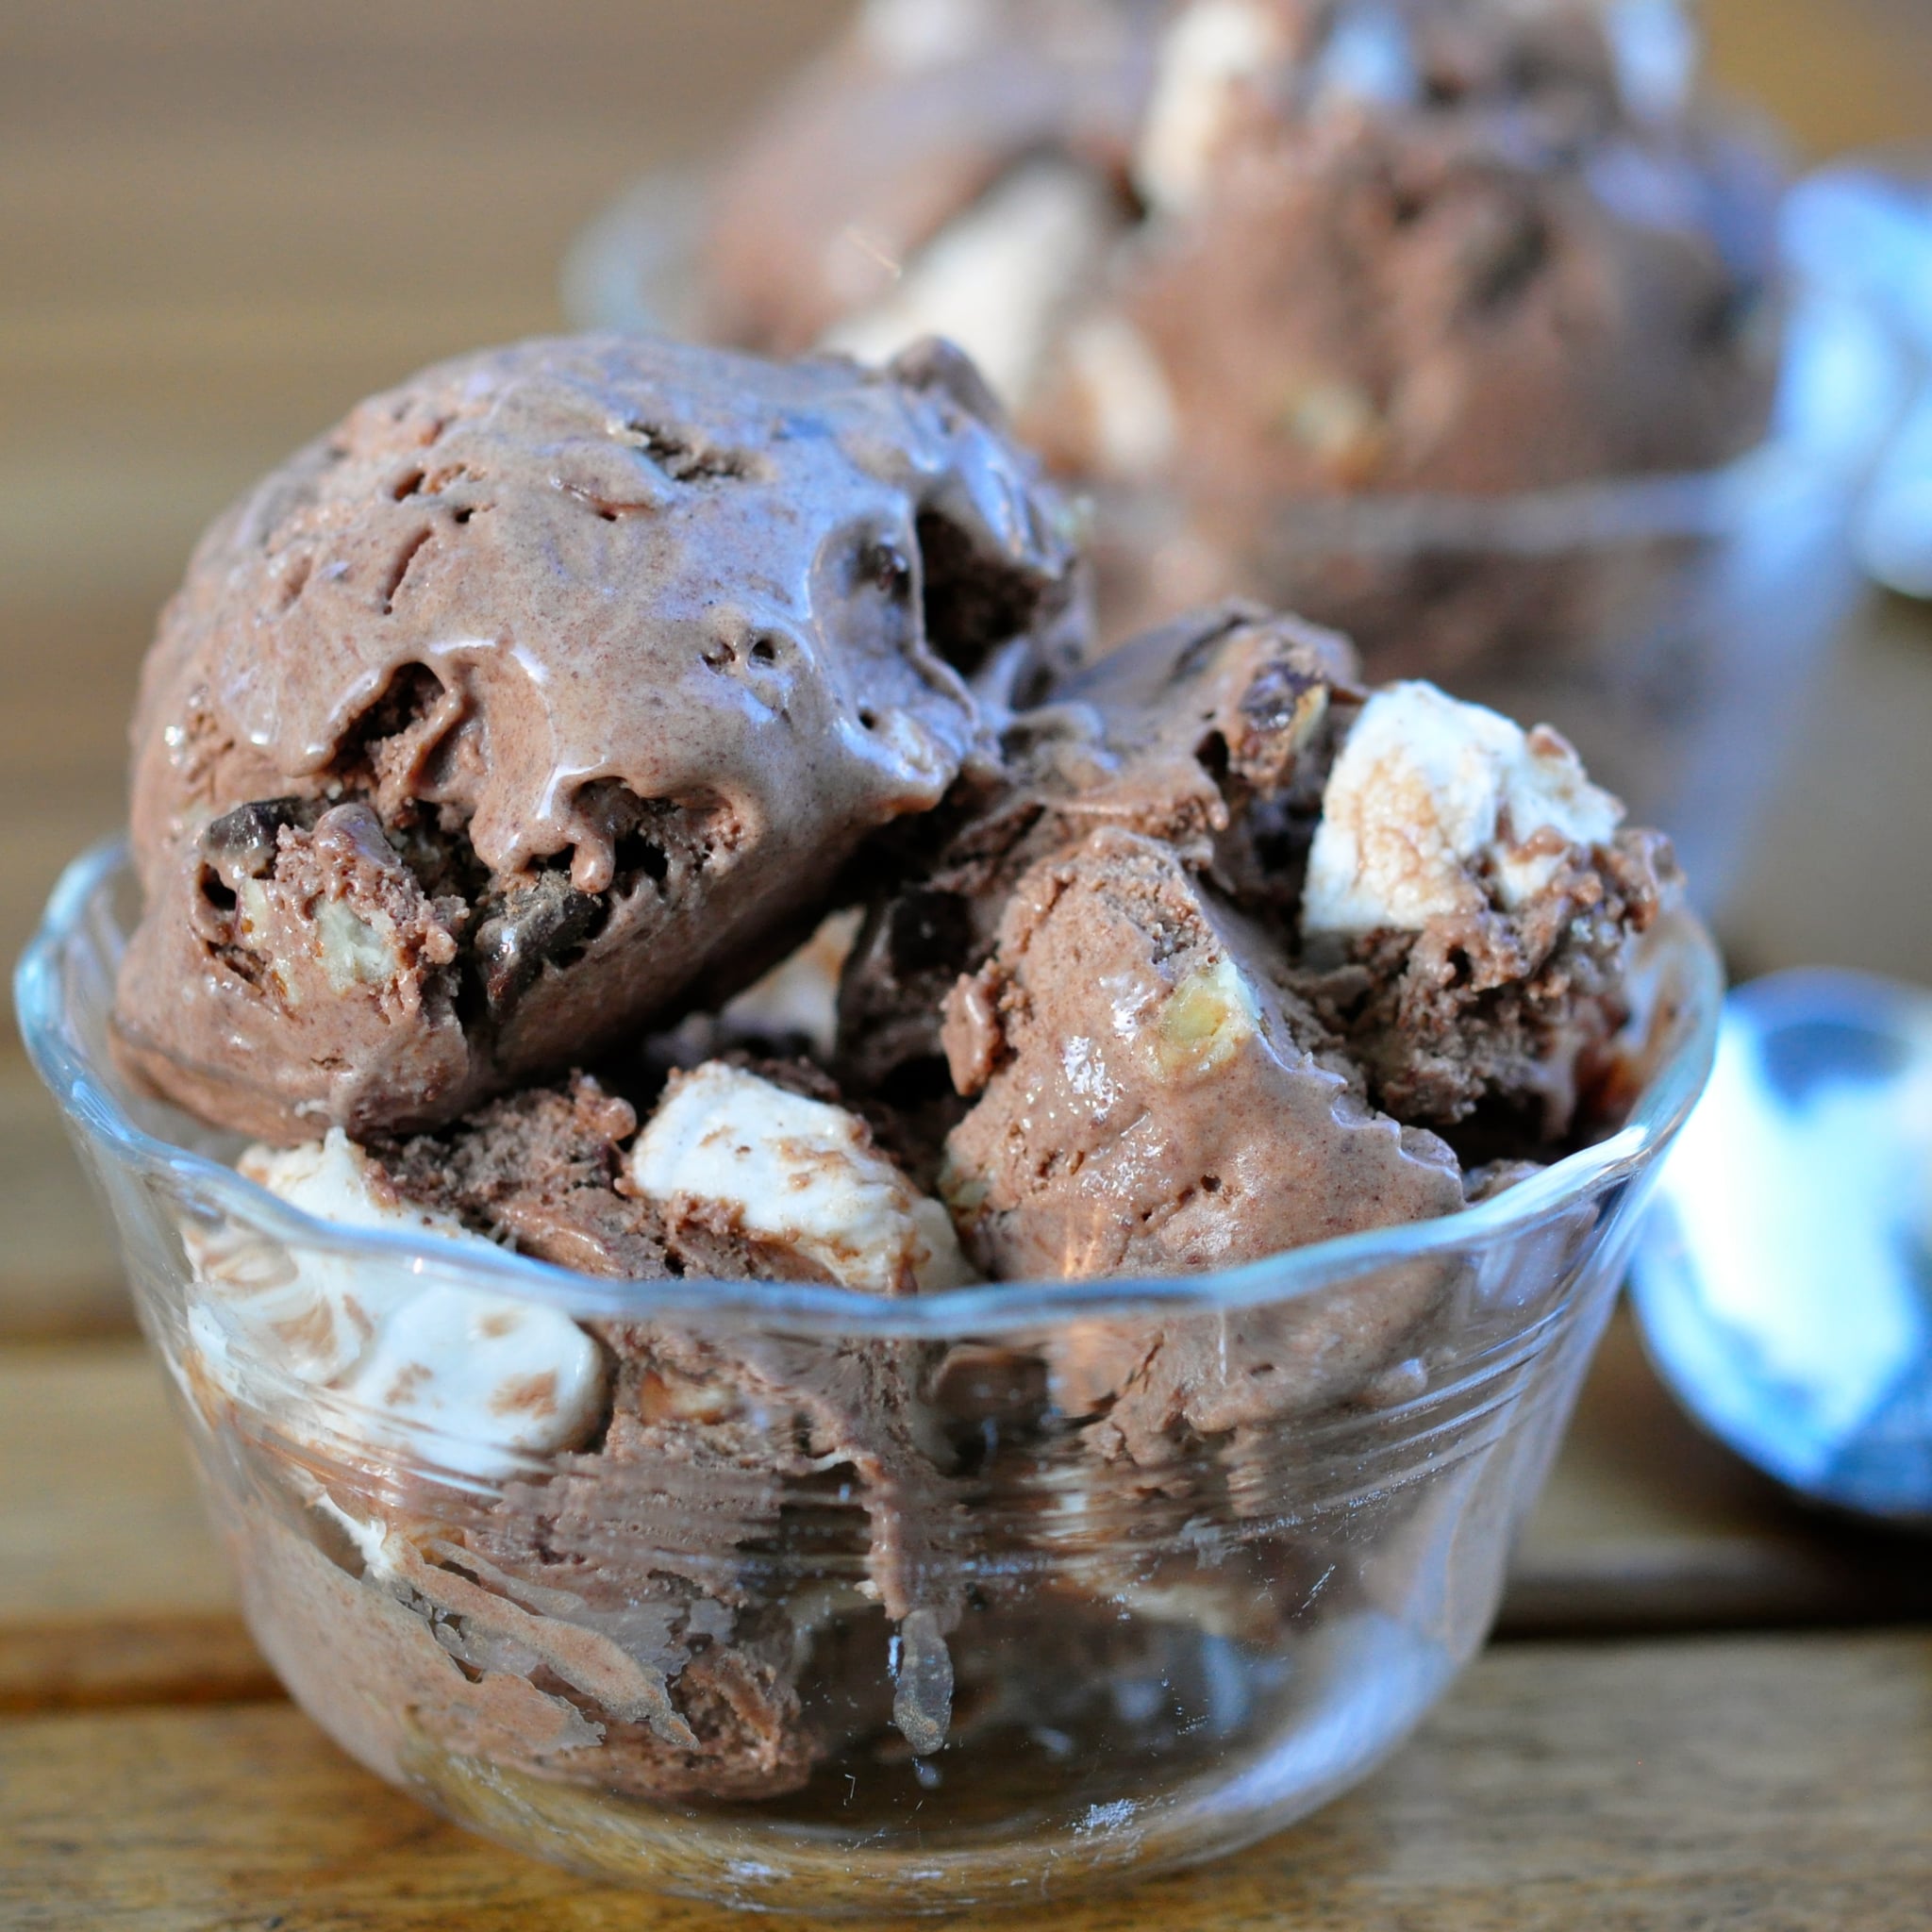 Collection 96+ Images rocky road ice cream pictures Full HD, 2k, 4k